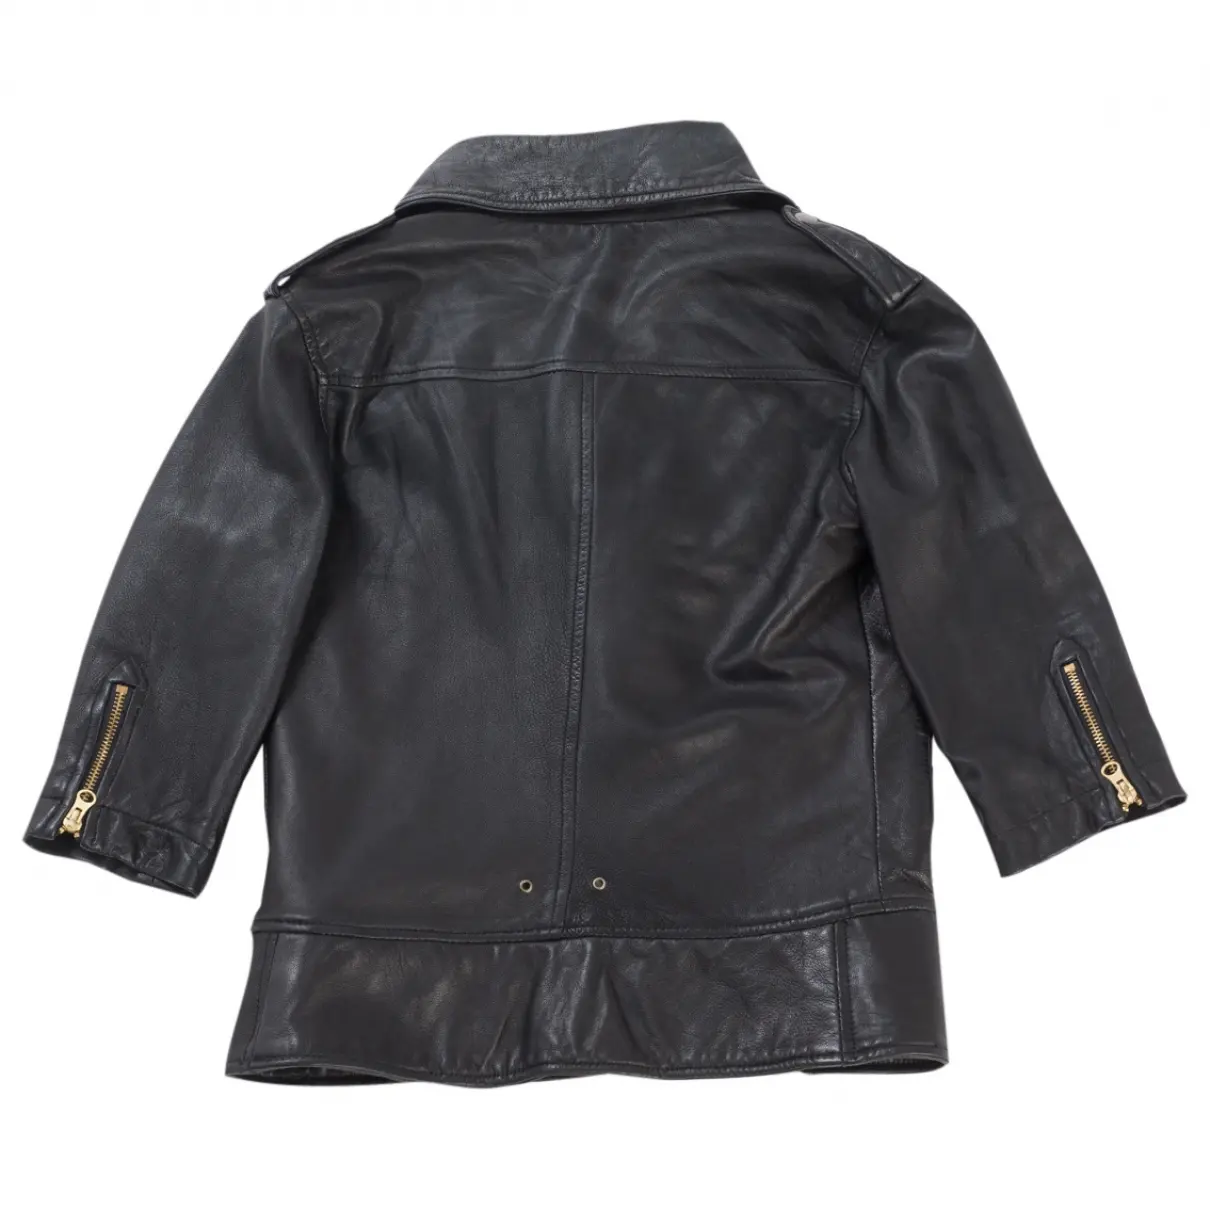 Mike & Chris Leather jacket for sale